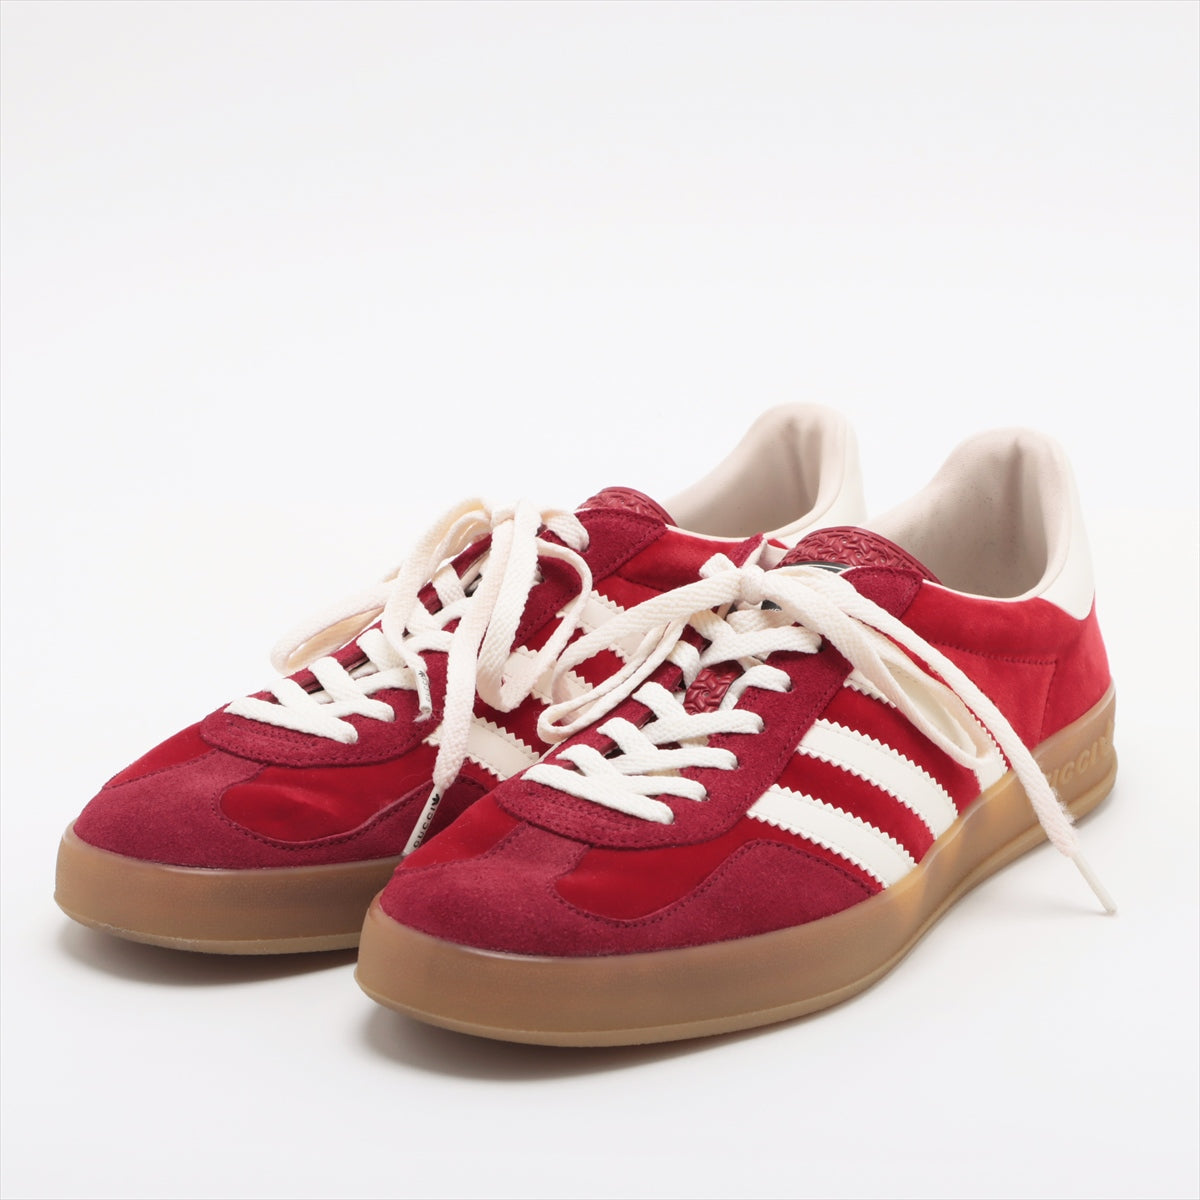 Gucci x adidas Velour & leather Sneakers 30cm Men's Red x white HQ8853 Gazelle Is there a replacement string